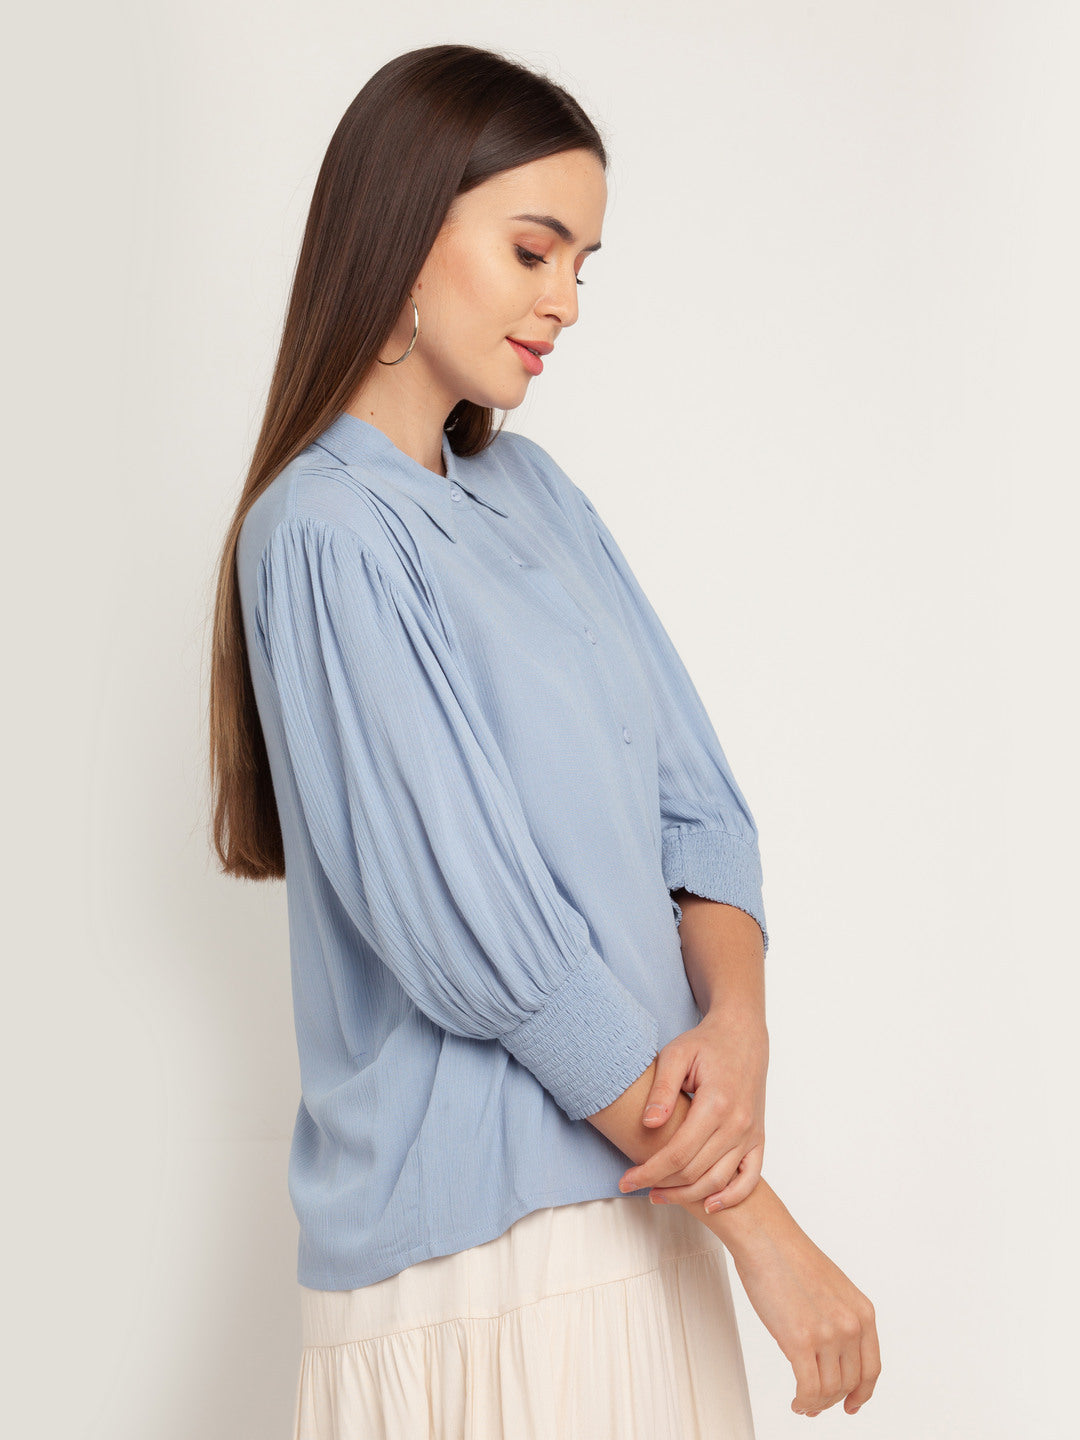 Blue Solid Shirt For Women